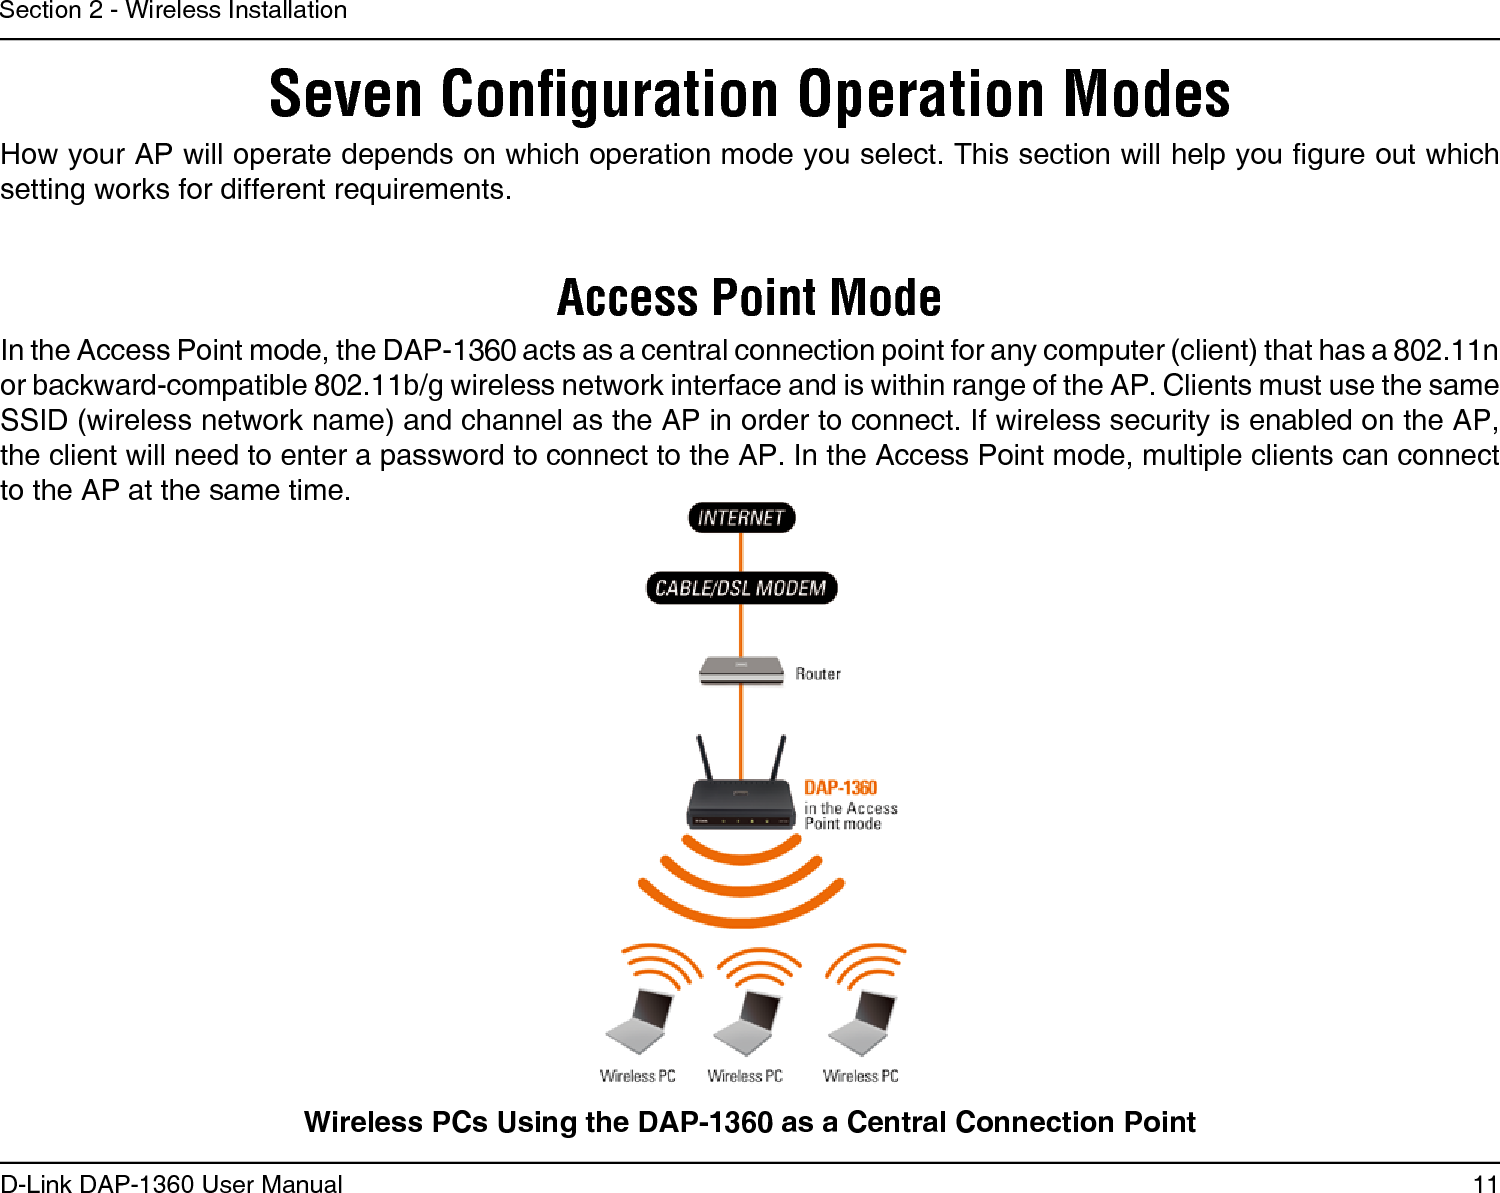 11D-Link DAP-1360 User ManualSection 2 - Wireless InstallationHow your AP will operate depends on which operation mode you select. This section will help you gure out which setting works for different requirements.Seven Conﬁguration Operation ModesAccess Point ModeIn the Access Point mode, the DAP-1360 acts as a central connection point for any computer (client) that has a 802.11n or backward-compatible 802.11b/g wireless network interface and is within range of the AP. Clients must use the same SSID (wireless network name) and channel as the AP in order to connect. If wireless security is enabled on the AP, the client will need to enter a password to connect to the AP. In the Access Point mode, multiple clients can connect to the AP at the same time.Wireless PCs Using the DAP-1360 as a Central Connection Point